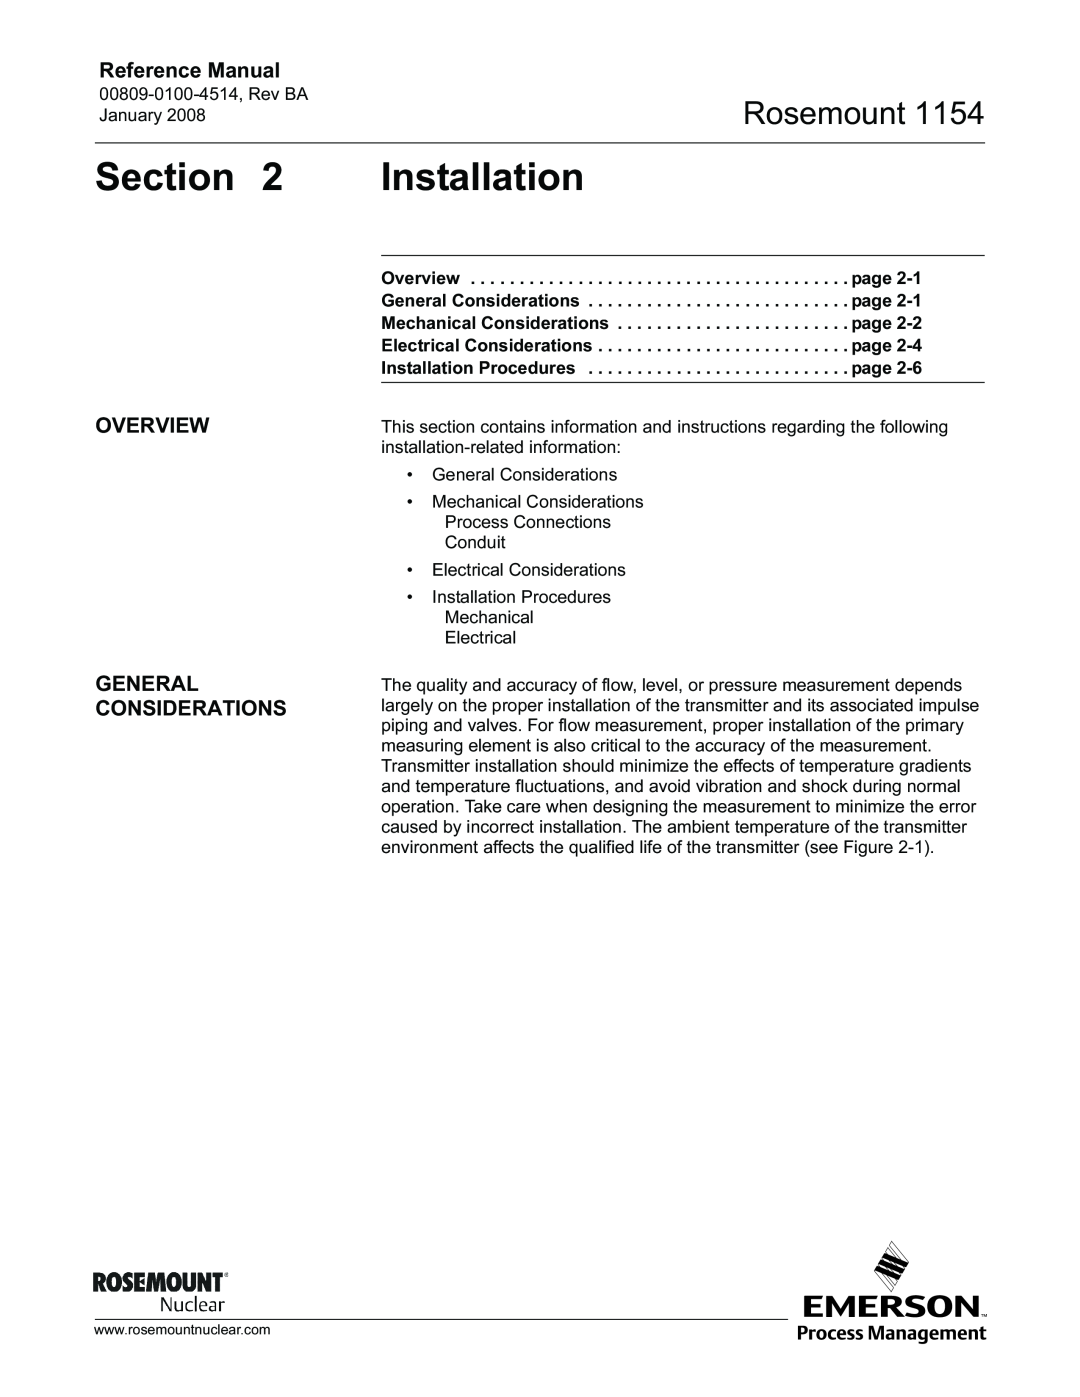 Emerson 1154, 00809-0100-4514 manual Installation, Overview General Considerations, Section, Rosemount, Reference Manual 